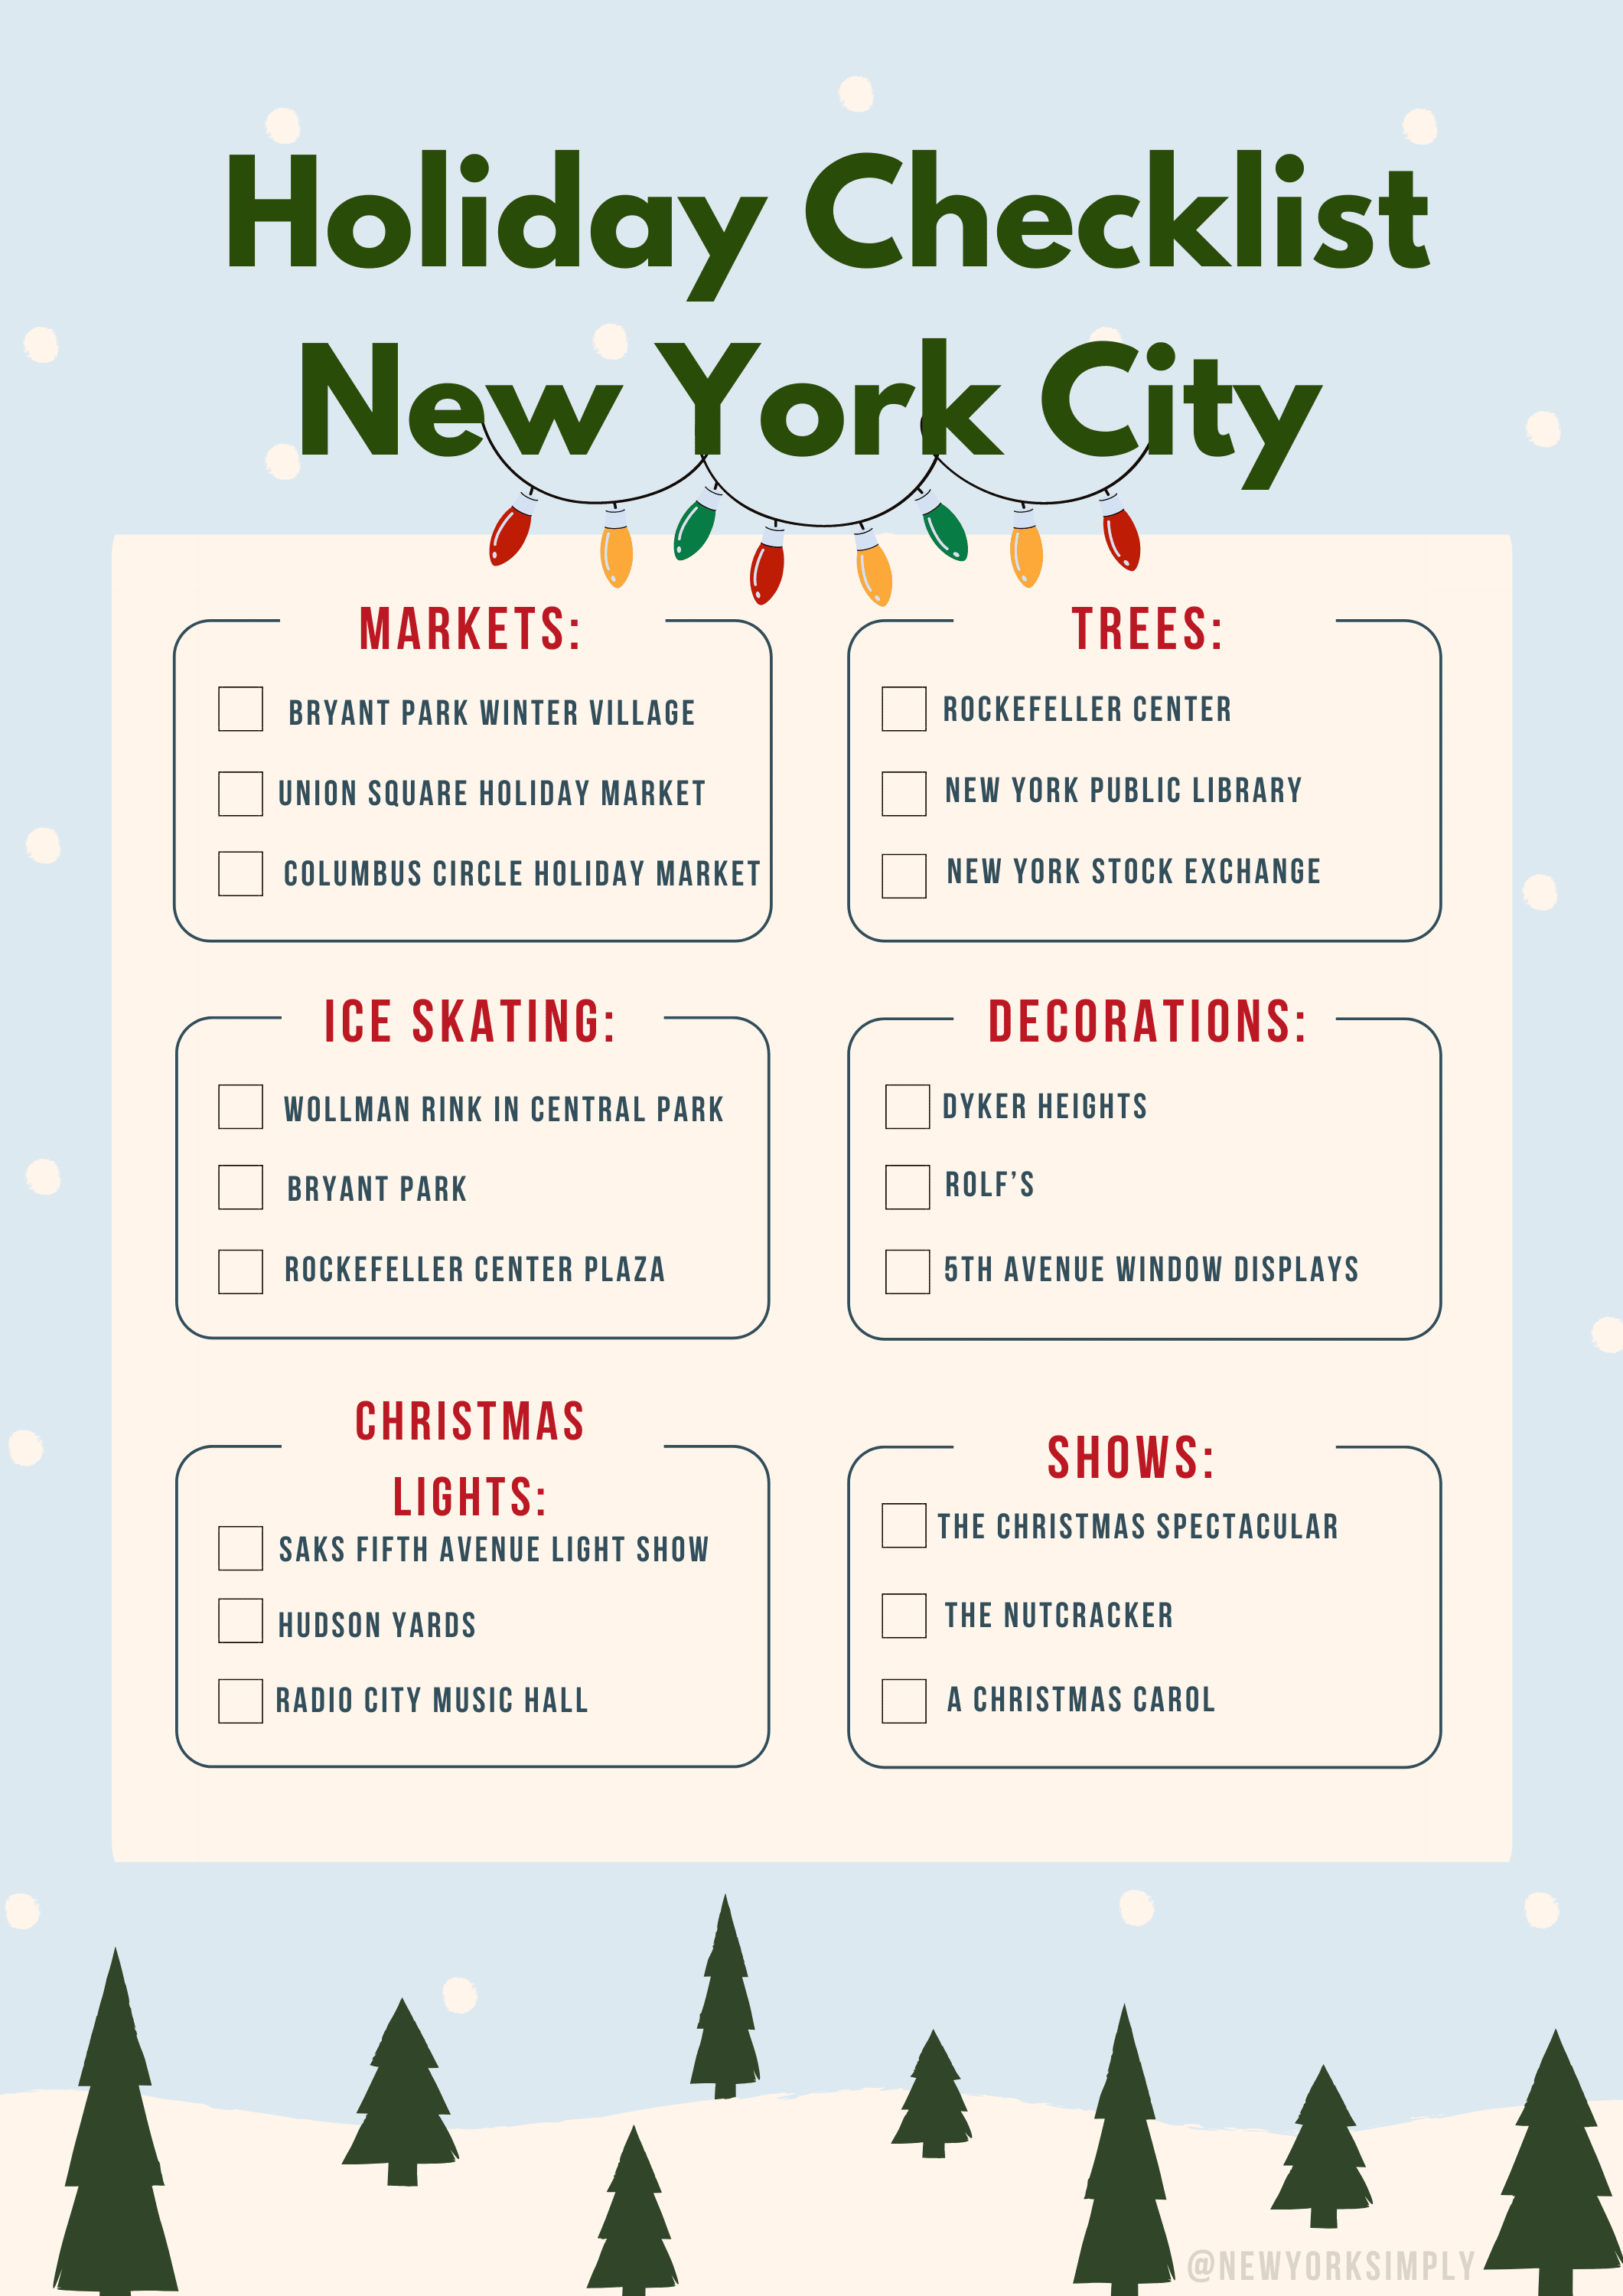 Holiday Checklist NYC
Downloadable Bucket List NYC